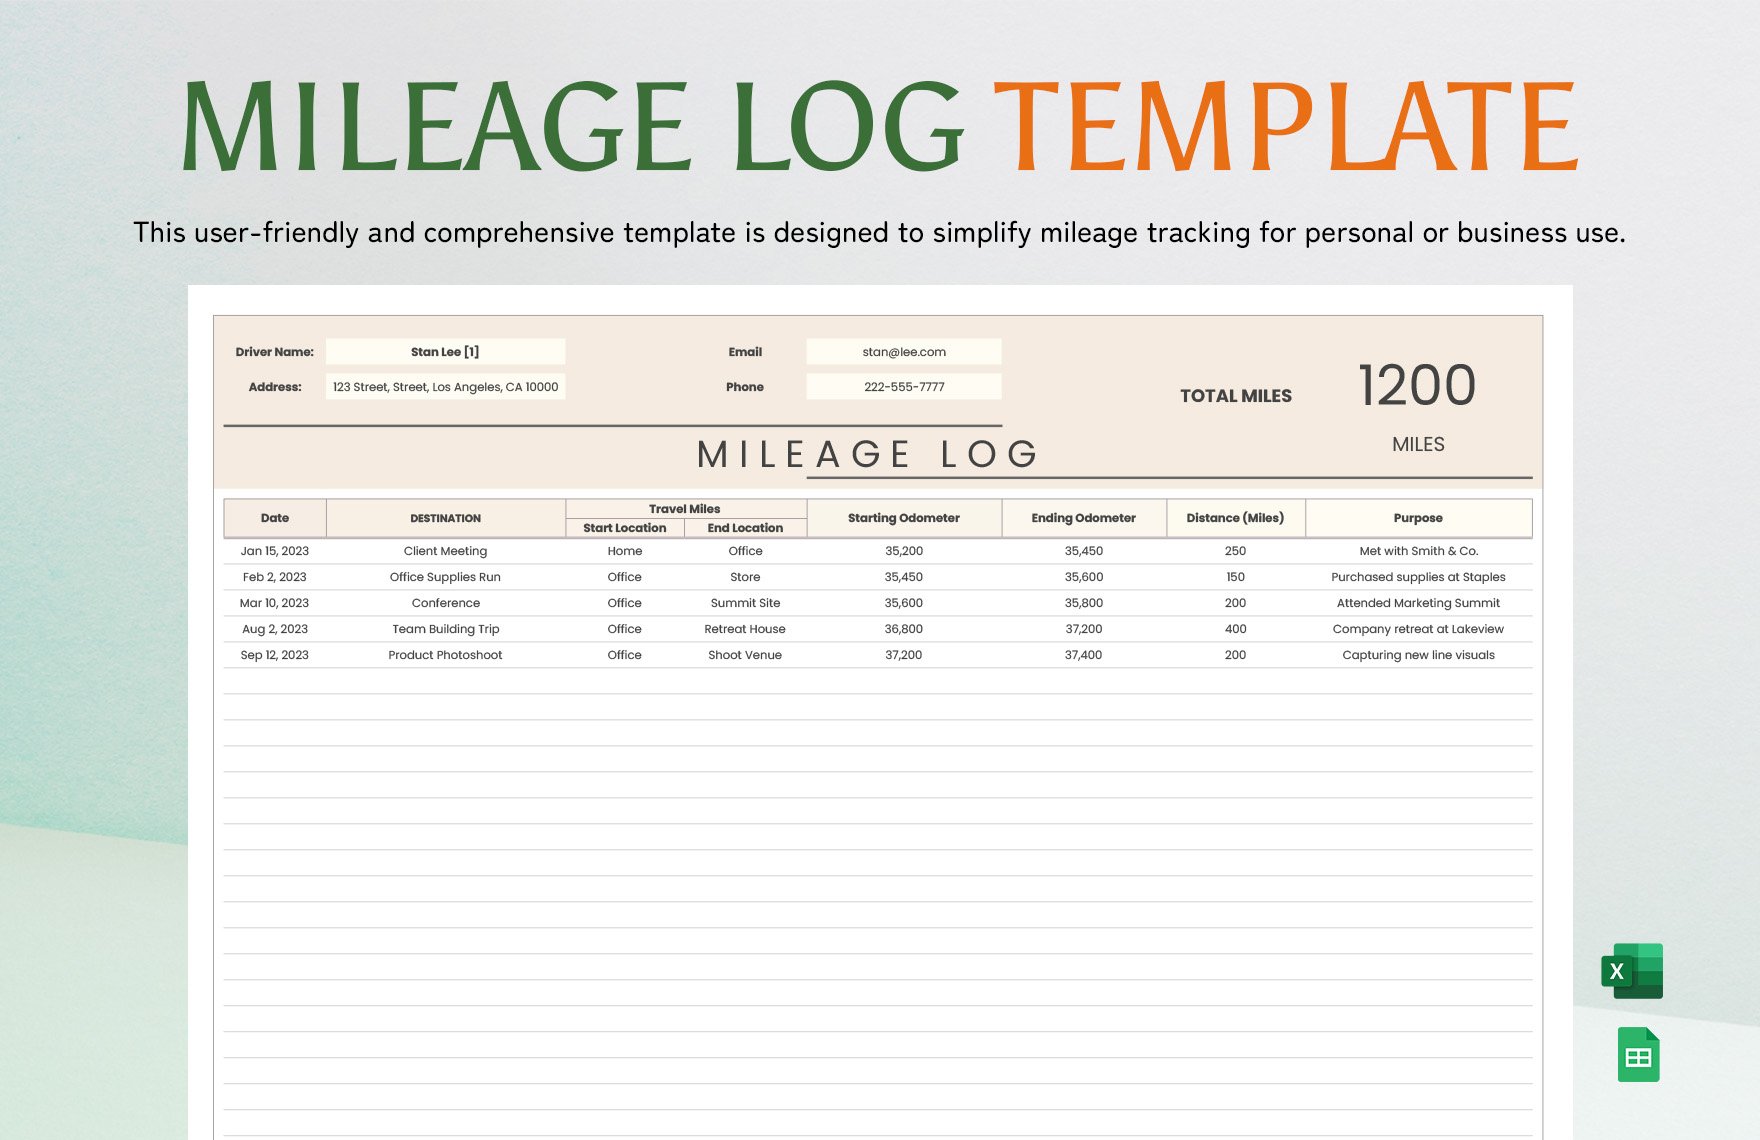 Mileage Log Template in Excel, Google Sheets